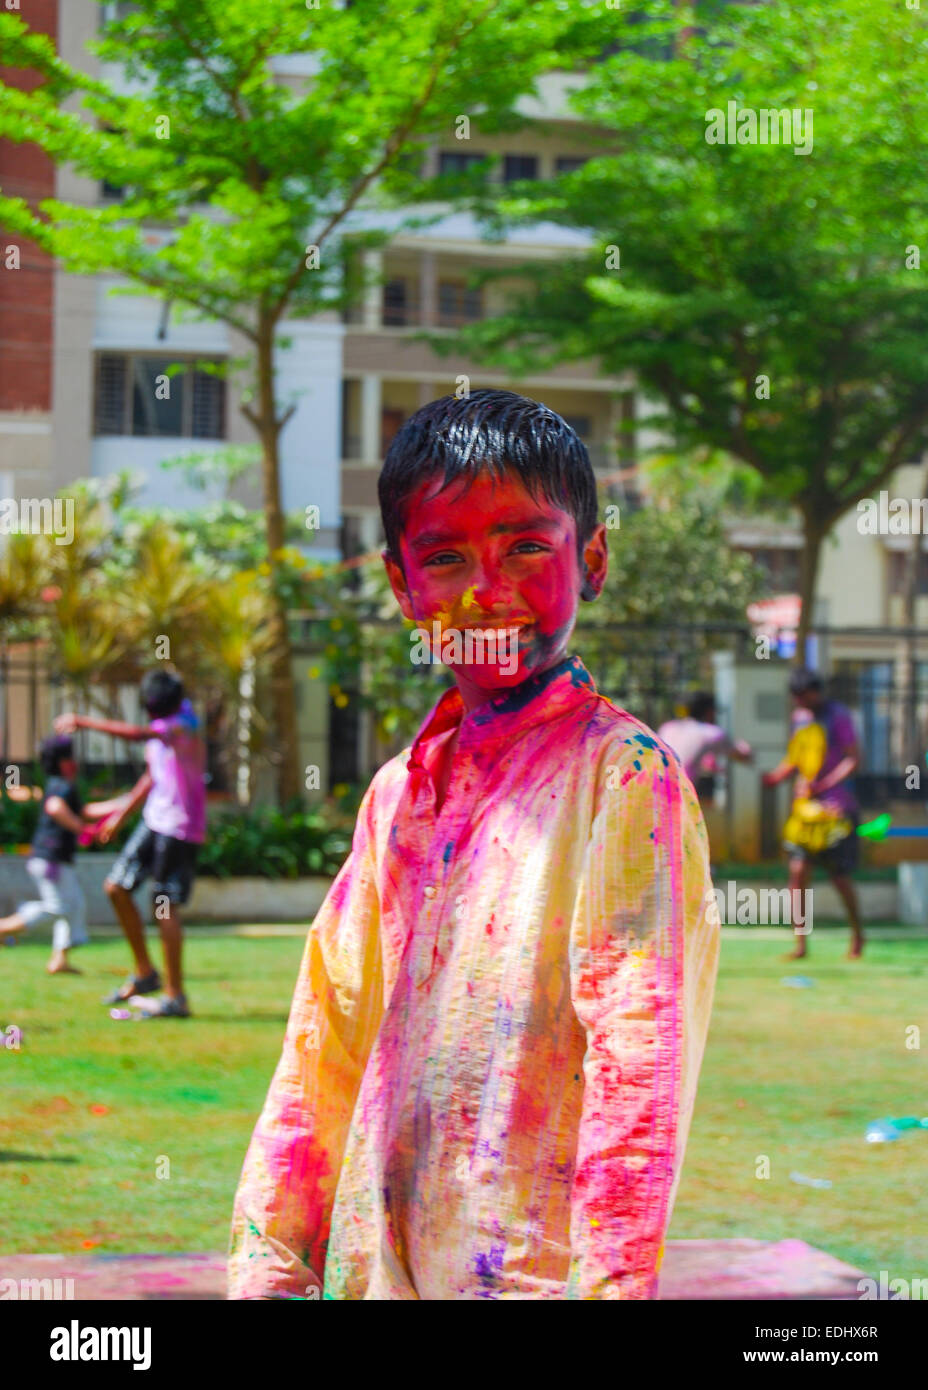 A young Indian boy playing with powder colors & water during the spring hindu festival Holi also known as a festival of colors. Stock Photo